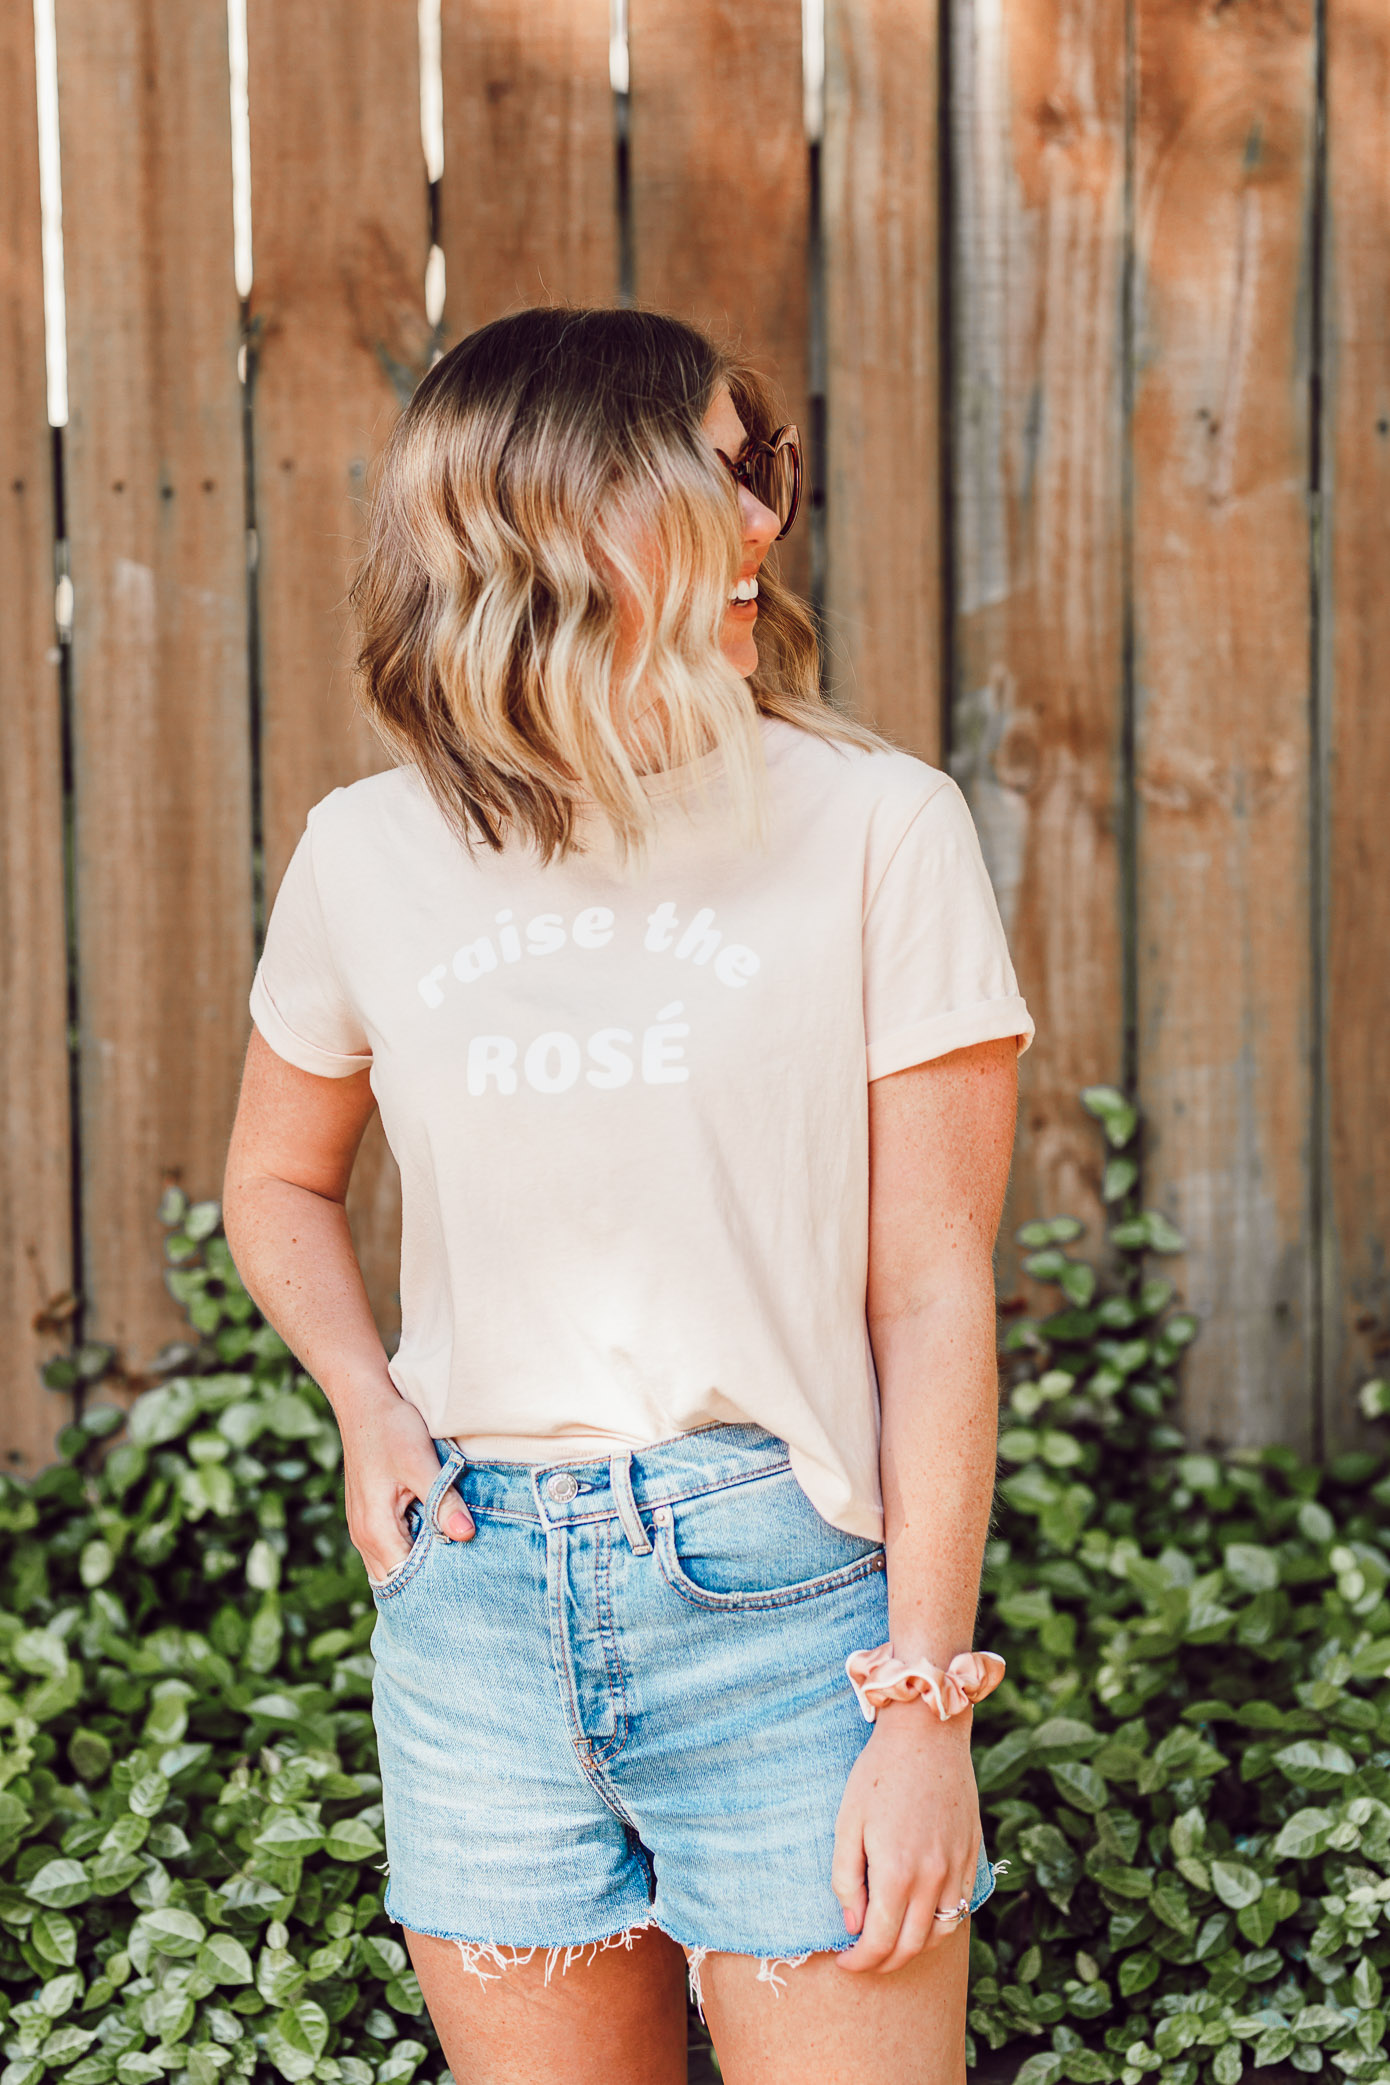 Raise the Rosé Graphic Tee | Cute Graphic Tees for Summer 2019 | Louella Reese